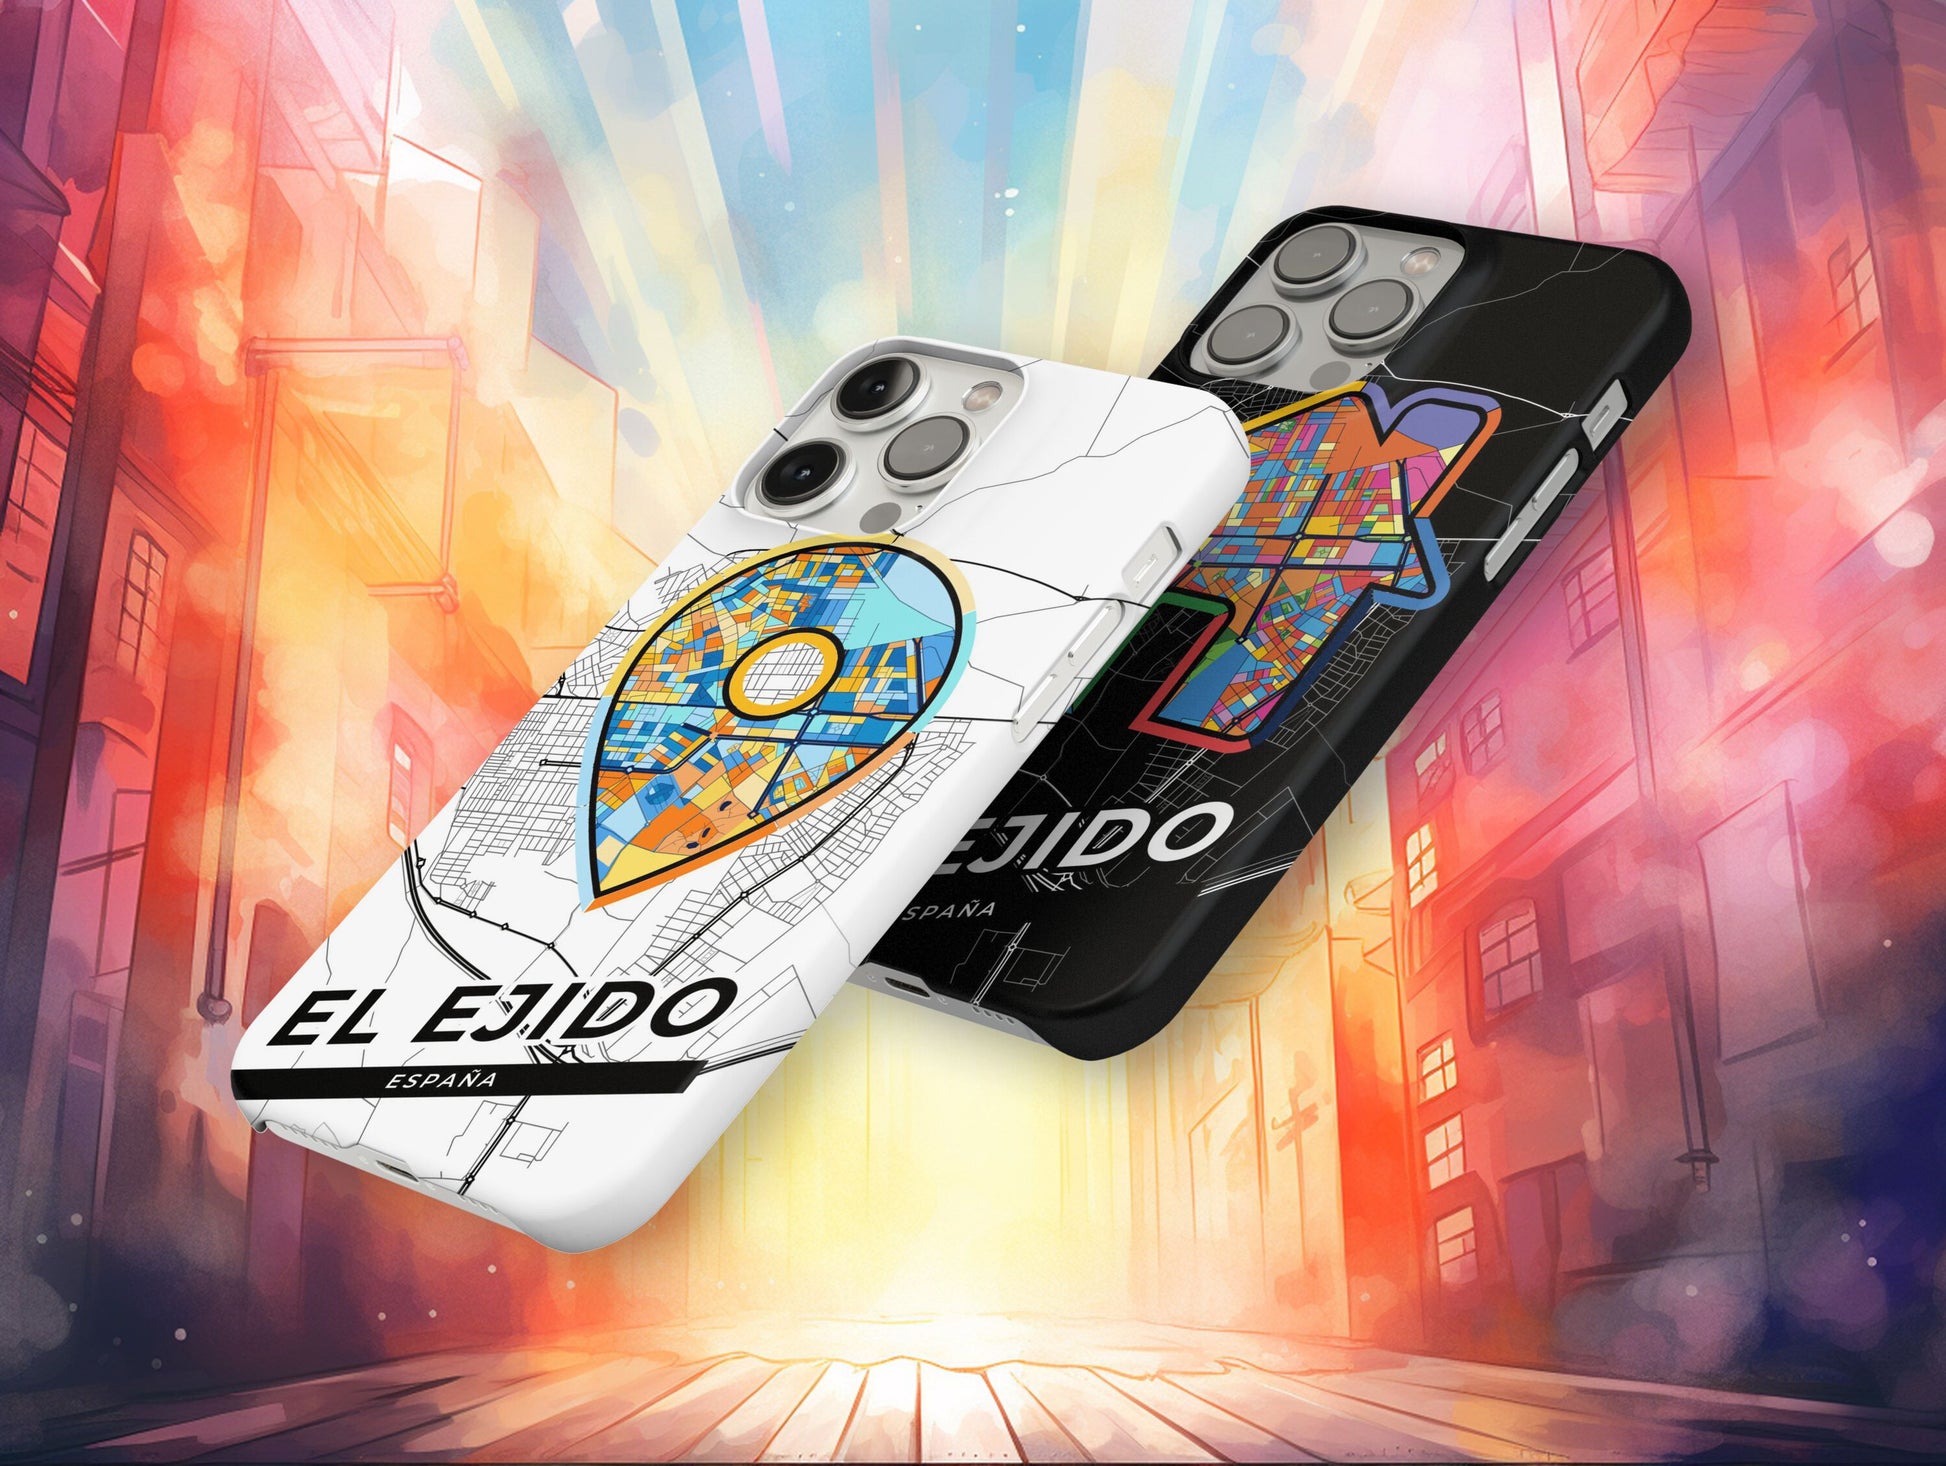 El Ejido Spain slim phone case with colorful icon. Birthday, wedding or housewarming gift. Couple match cases.